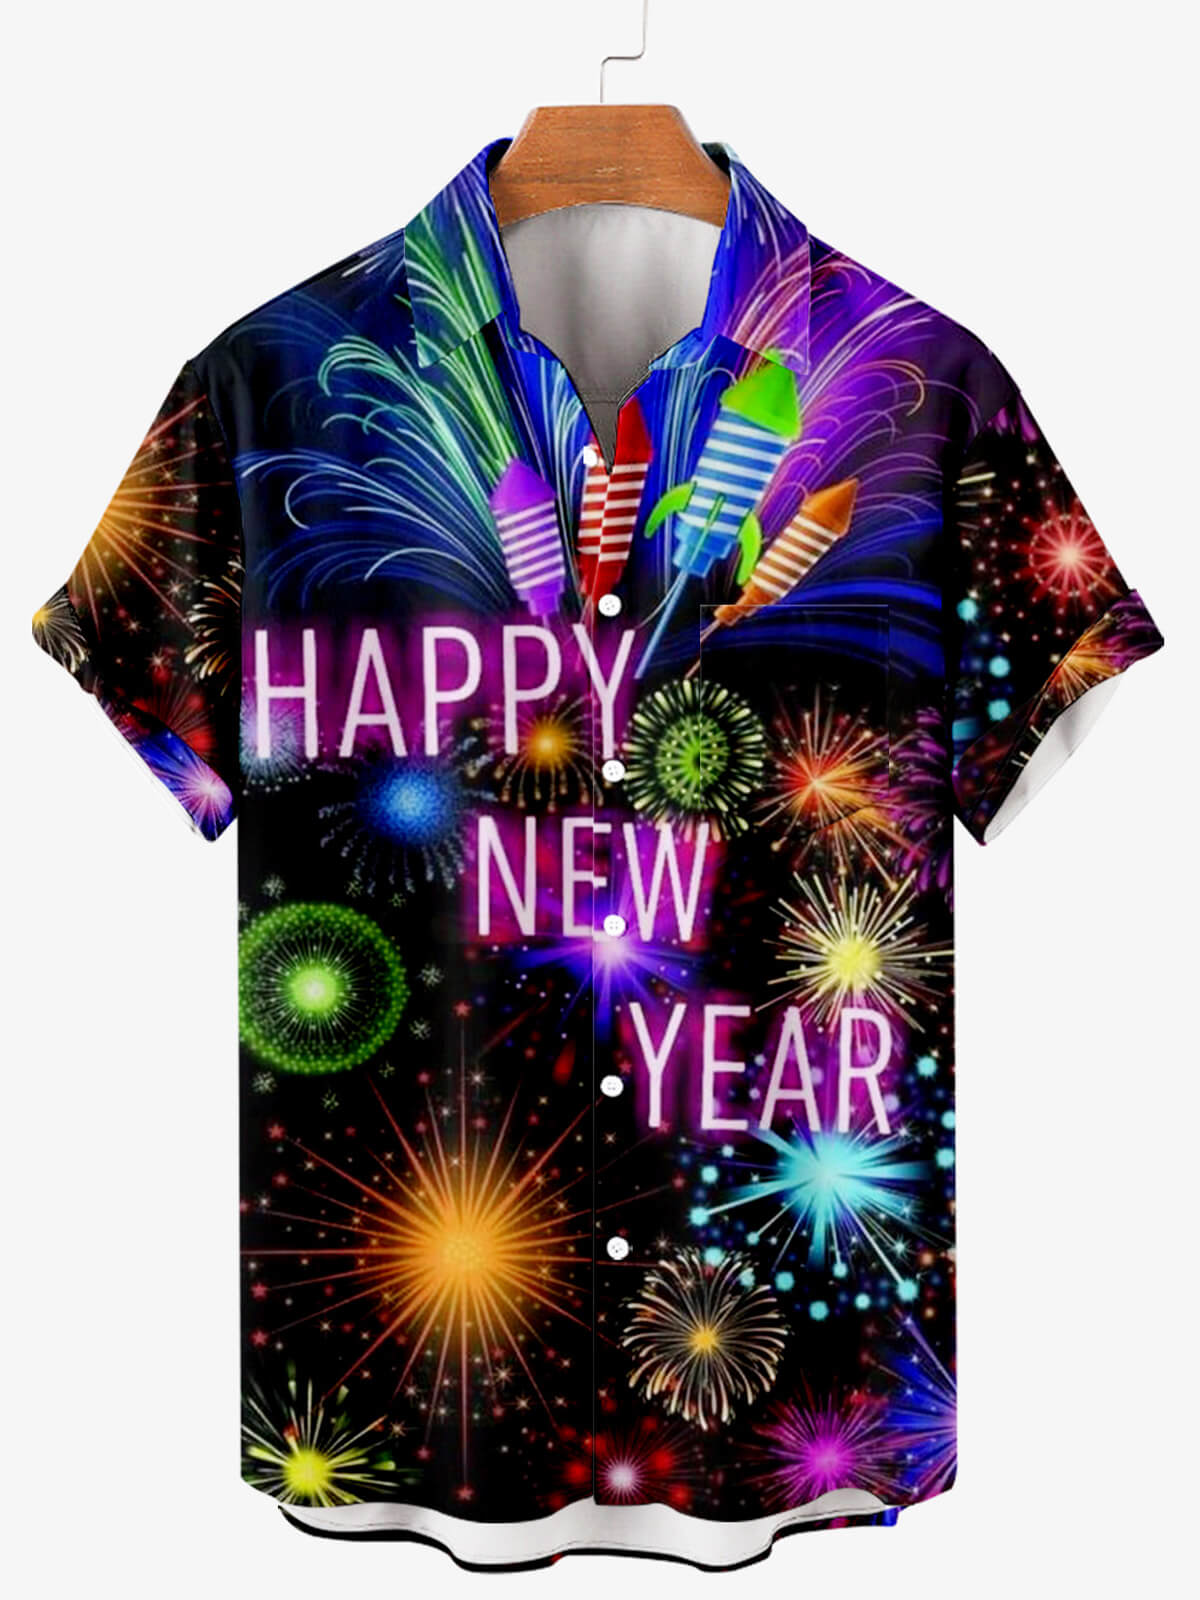 Men's Celebrate Merry Christmas and Happy New Year Short Sleeve Shirt PLUSCLOTHESMAN